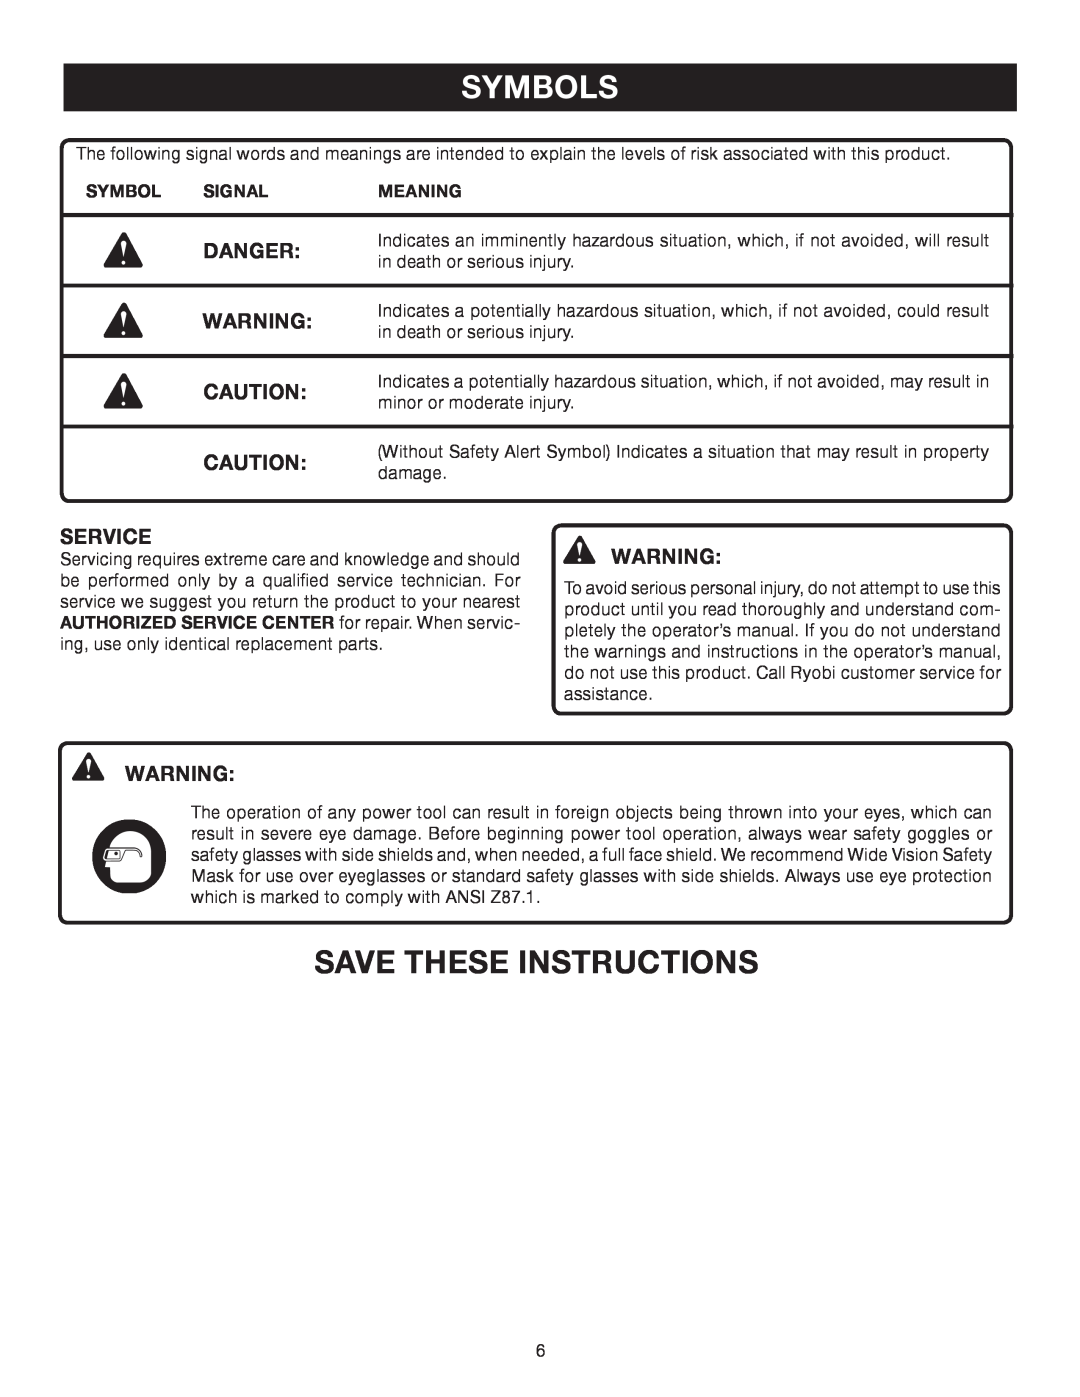 Ryobi RY60512 manual Save These Instructions, Danger, Symbols, Service, Signal, Meaning 